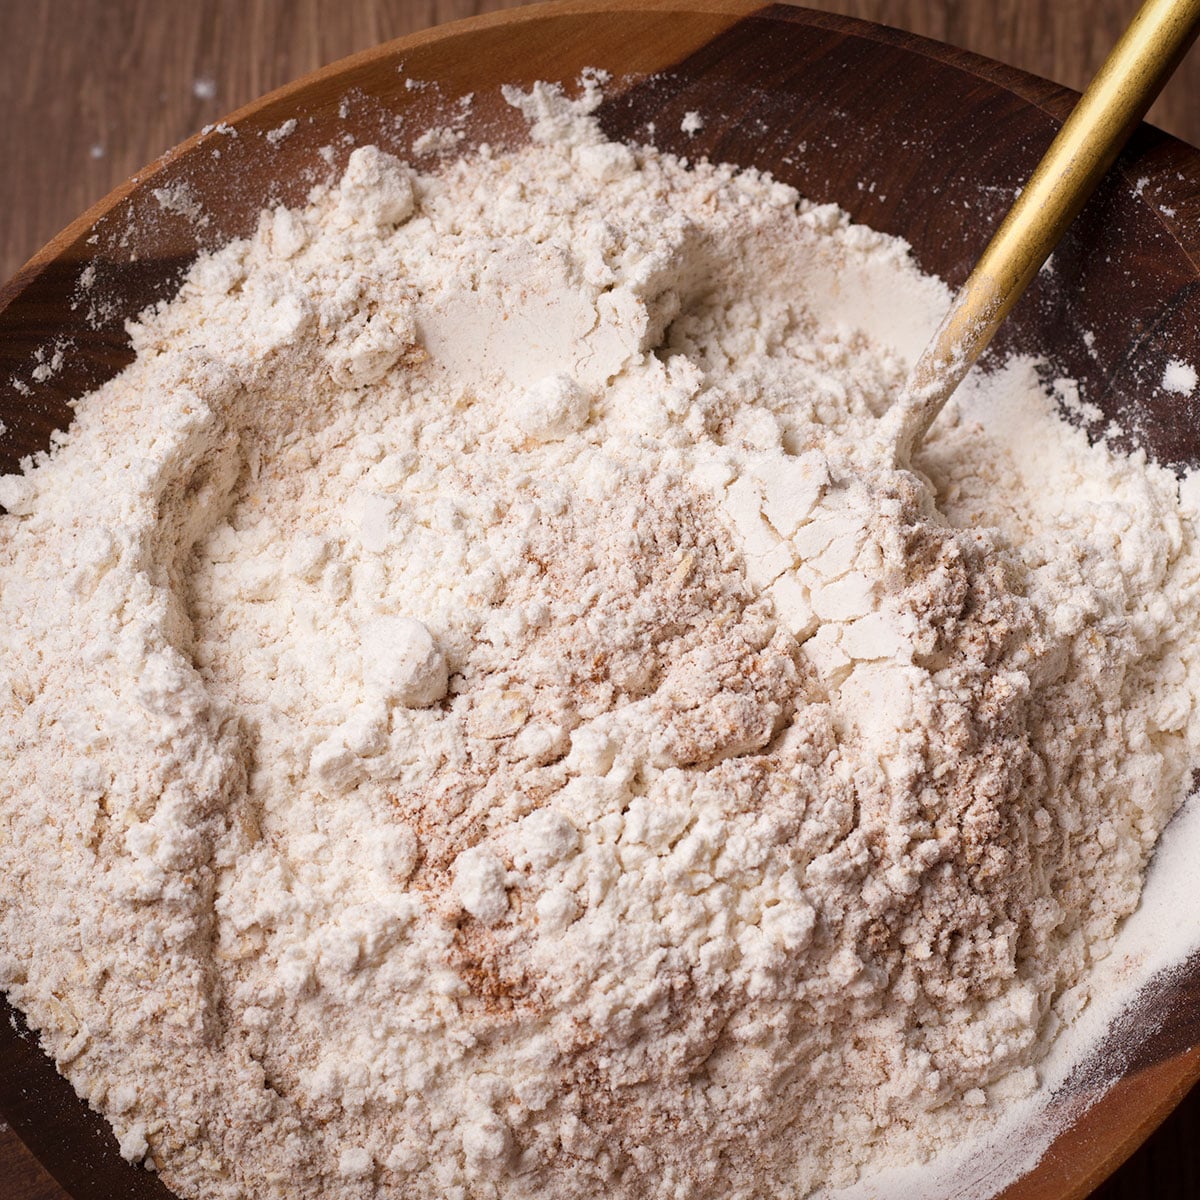 Using a spoon to stir whole wheat flour, all-purpose flour, baking soda, and salt together in a bowl.